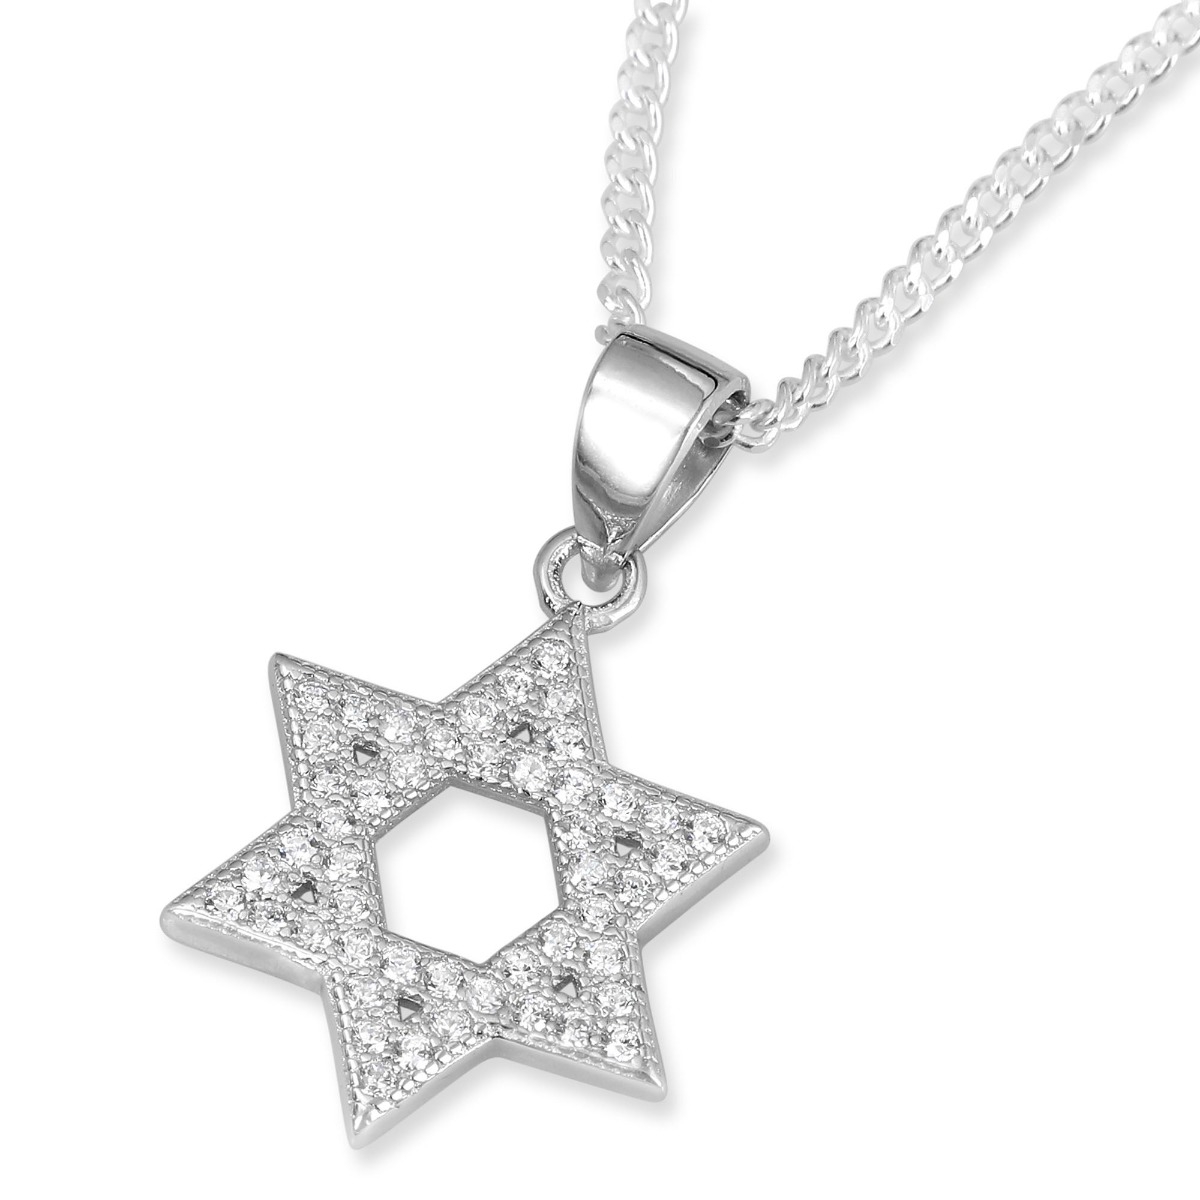 Designer 925 Sterling Silver Star of David Pendant Necklace With Zircon Stones - 1